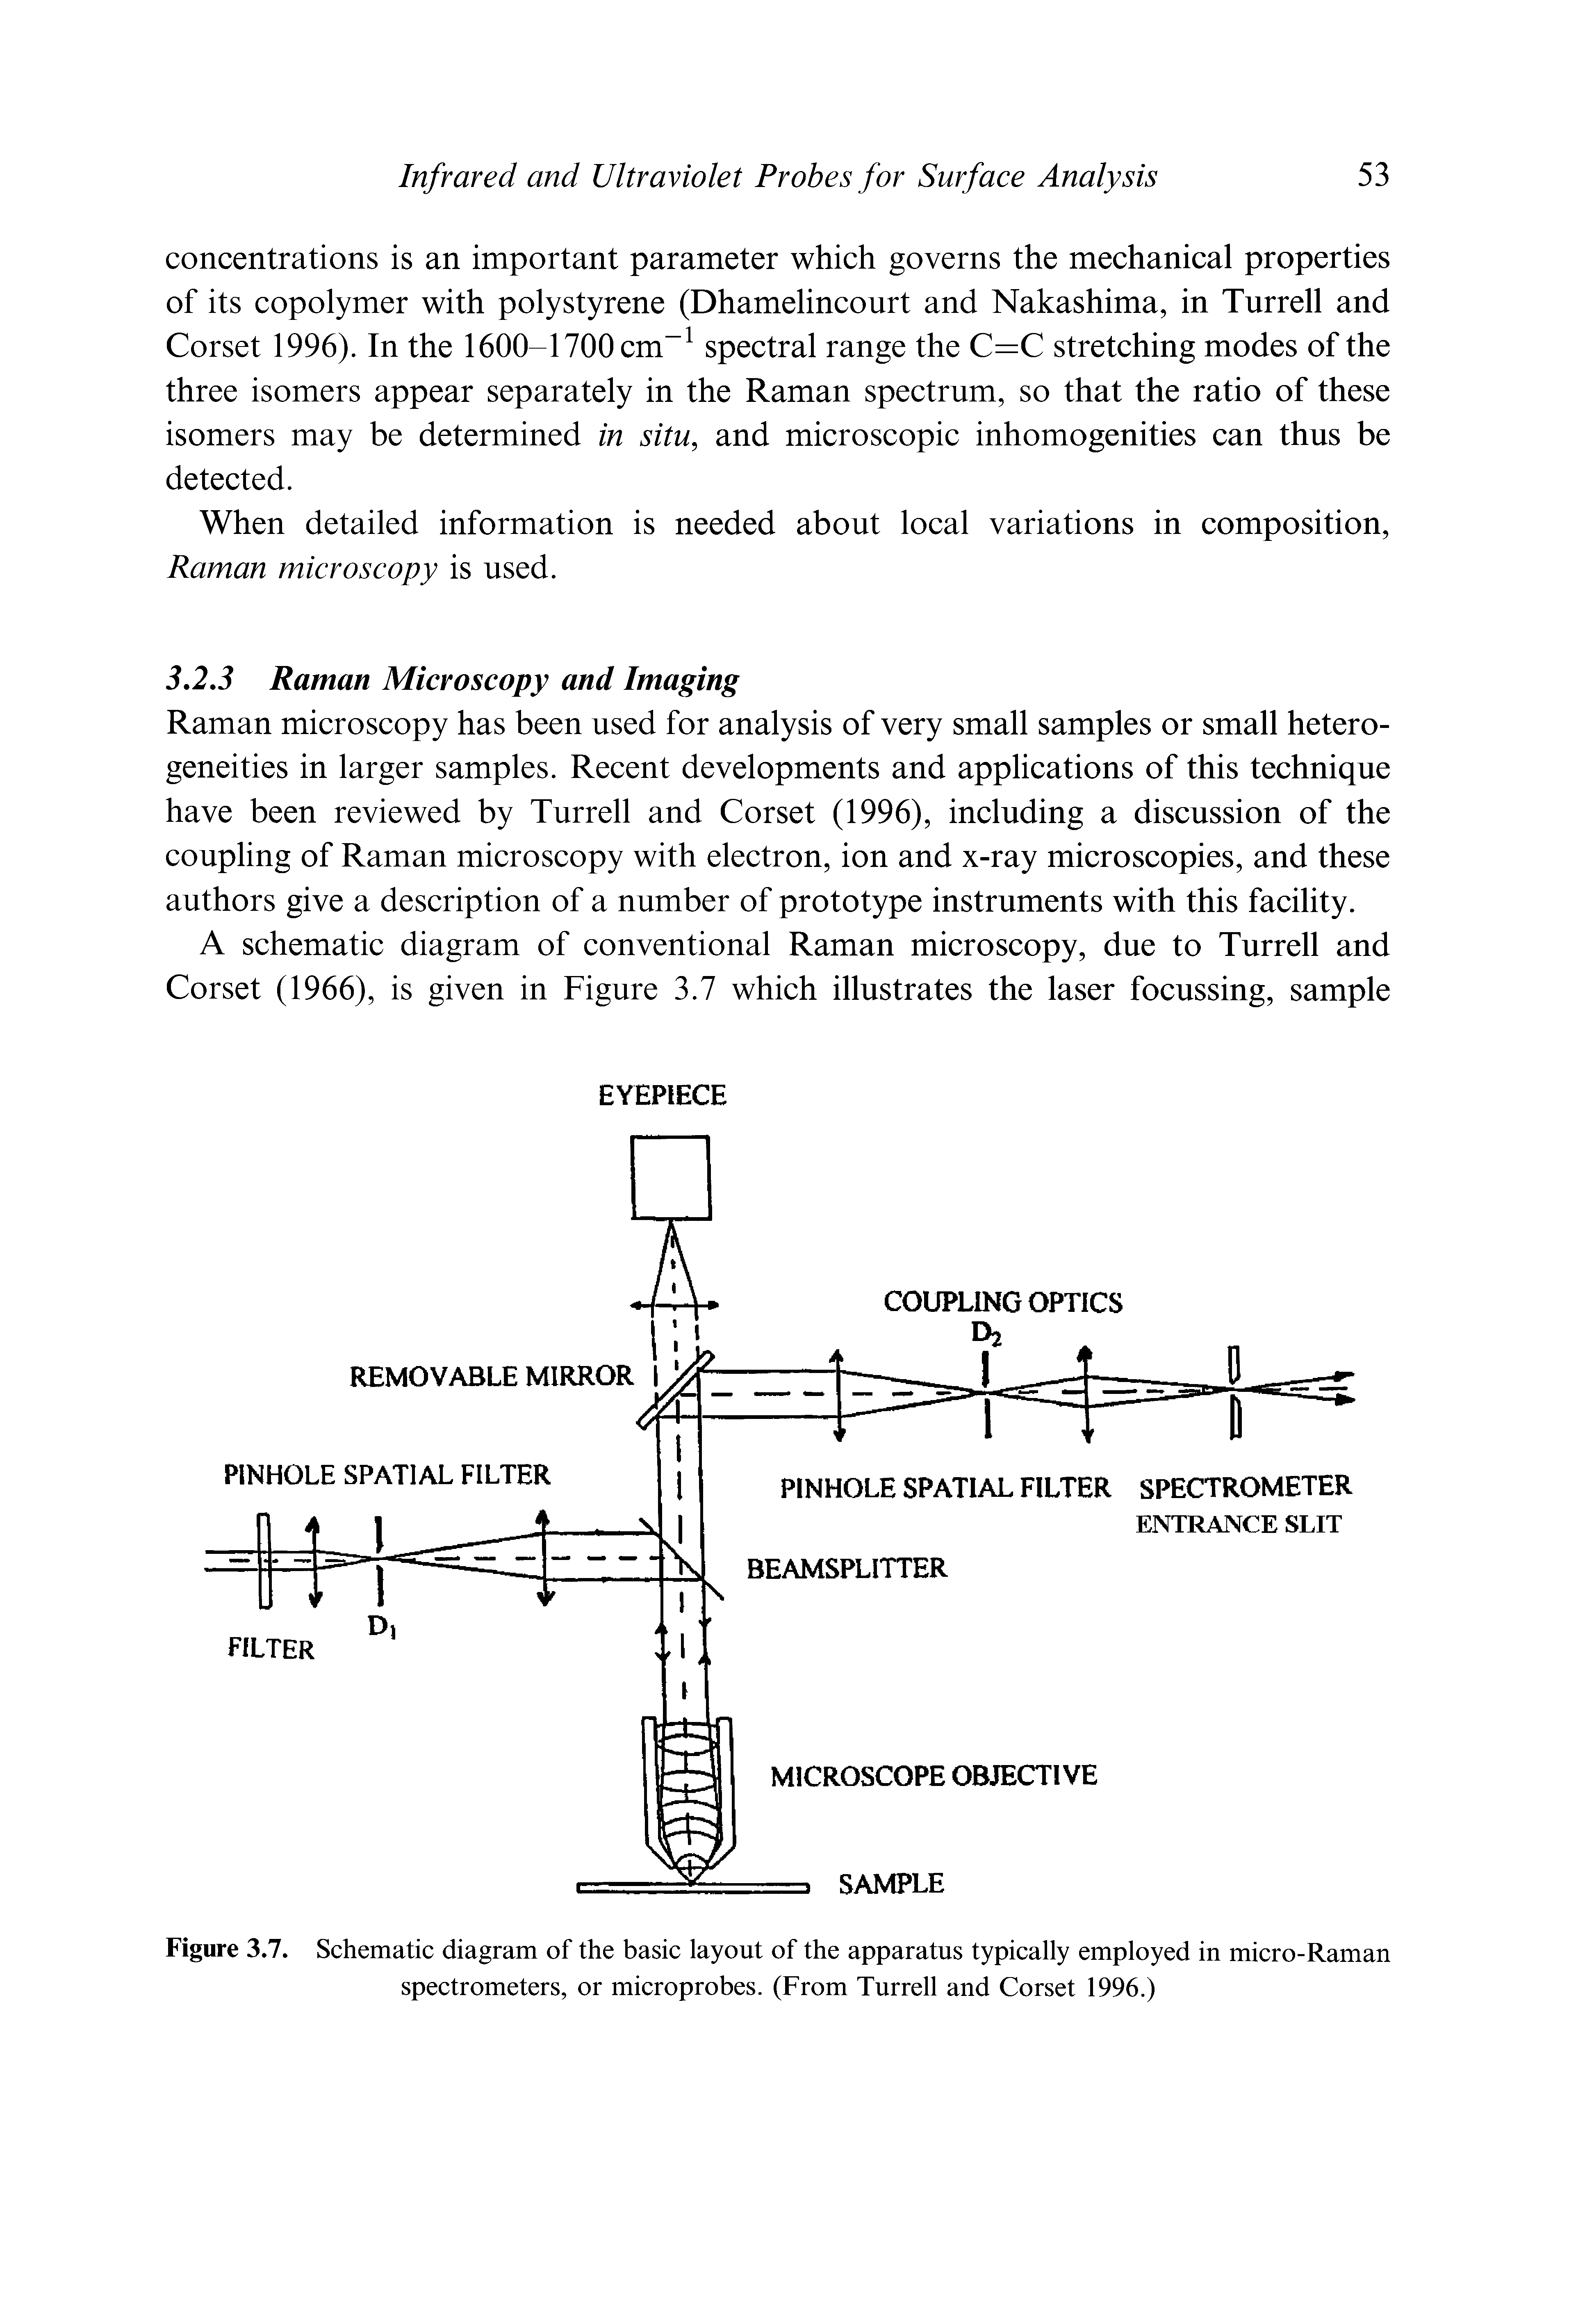 Figure 3.7. Schematic diagram of the basic layout of the apparatus typically employed in micro-Raman spectrometers, or microprobes. (From Turrell and Corset 1996.)...